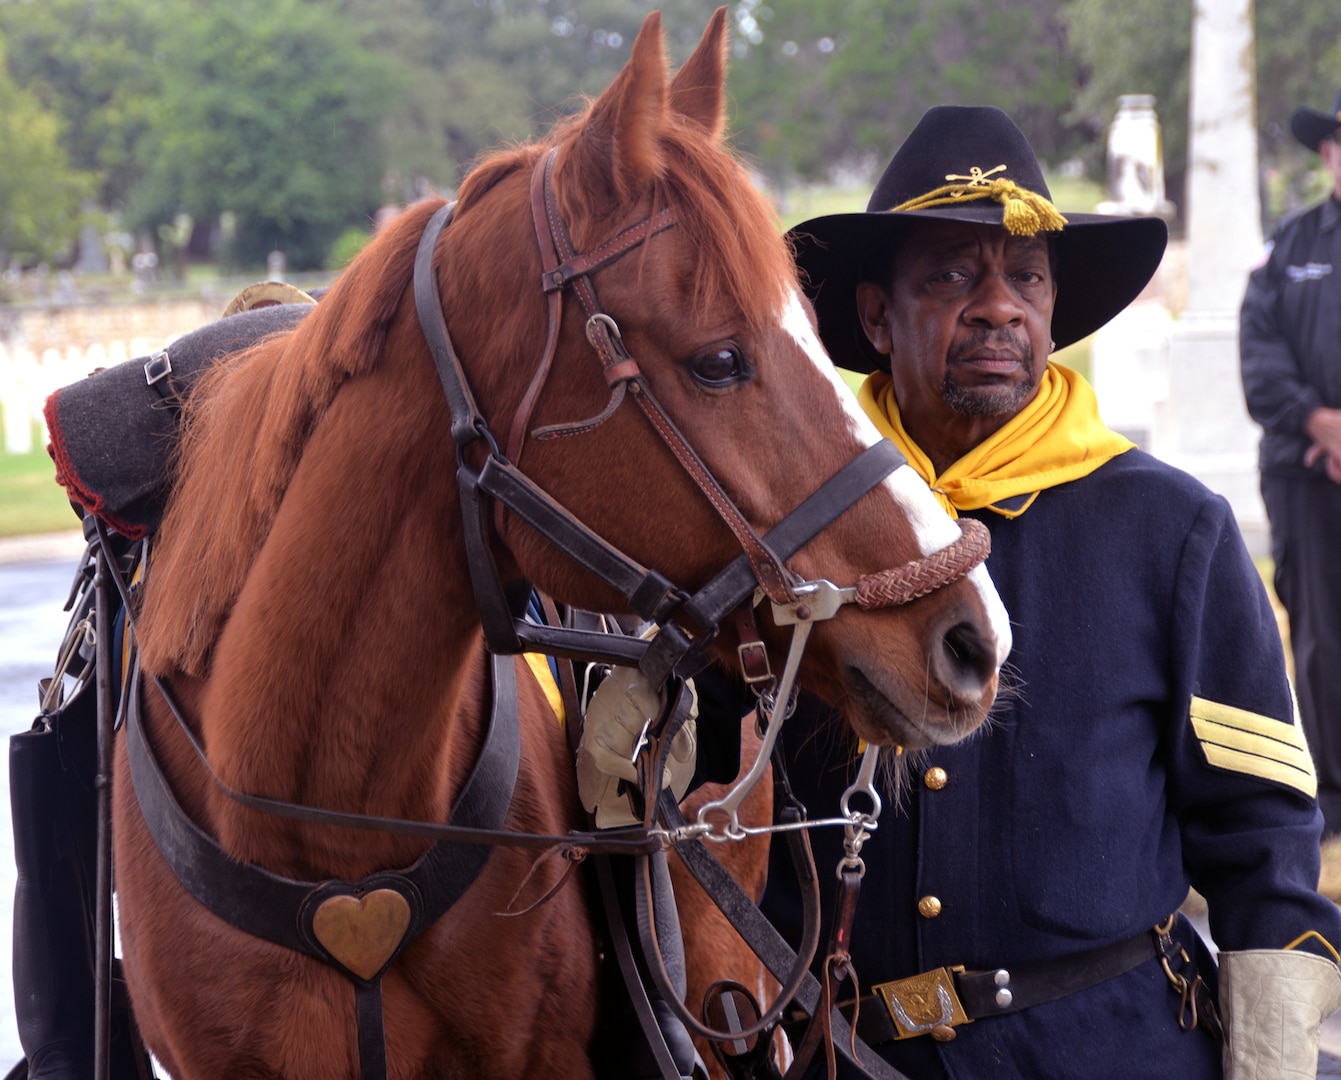 A member of the Bexar County Buffalo Soldiers stands with his mount into the San Antonio National Cemetery Nov. 11 for the annual Bexar County Buffalo Soldiers Commemorative Ceremony. Comprised of former slaves, freed men and Black Civil War veterans, the historic Buffalo Soldiers persevered through the most difficult conditions imaginable to become some of the most elite and most decorated units in the U.S. Army.